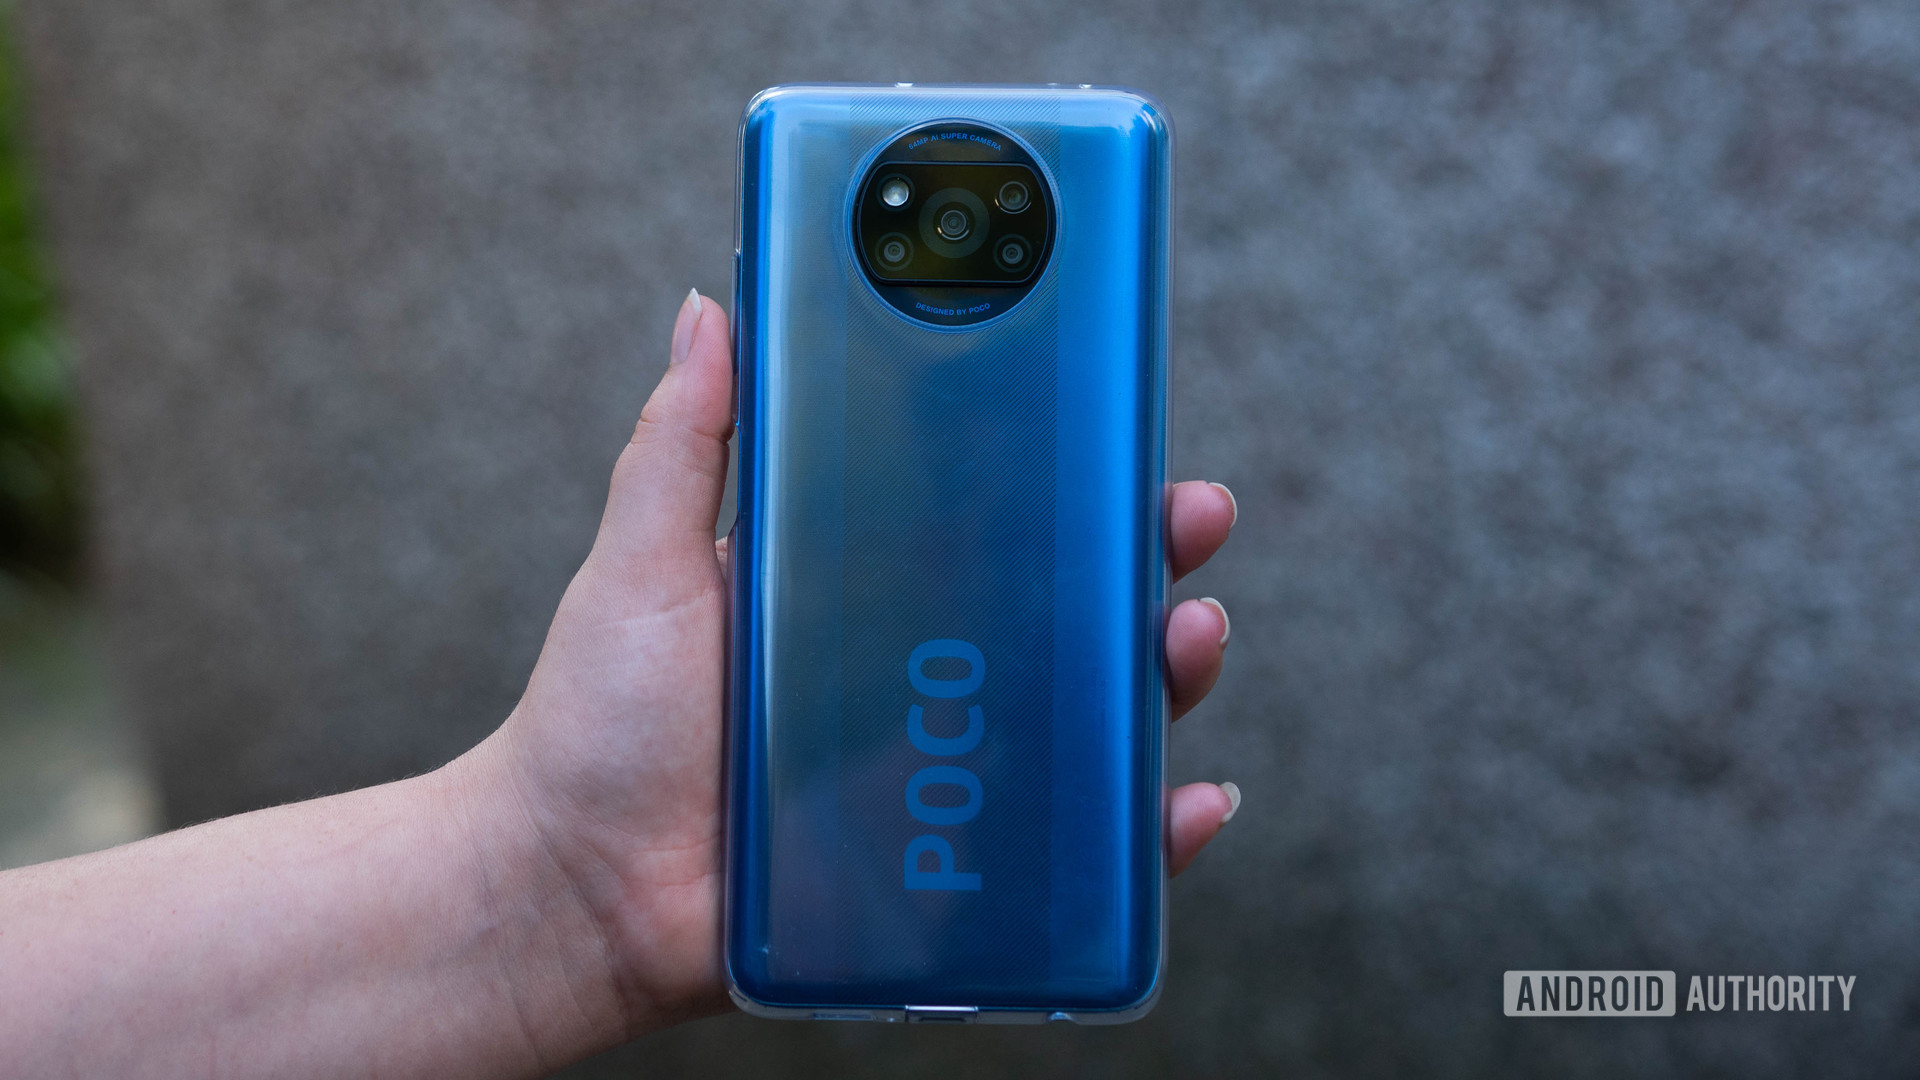 Xiaomi POCO X3 NFC in its included case